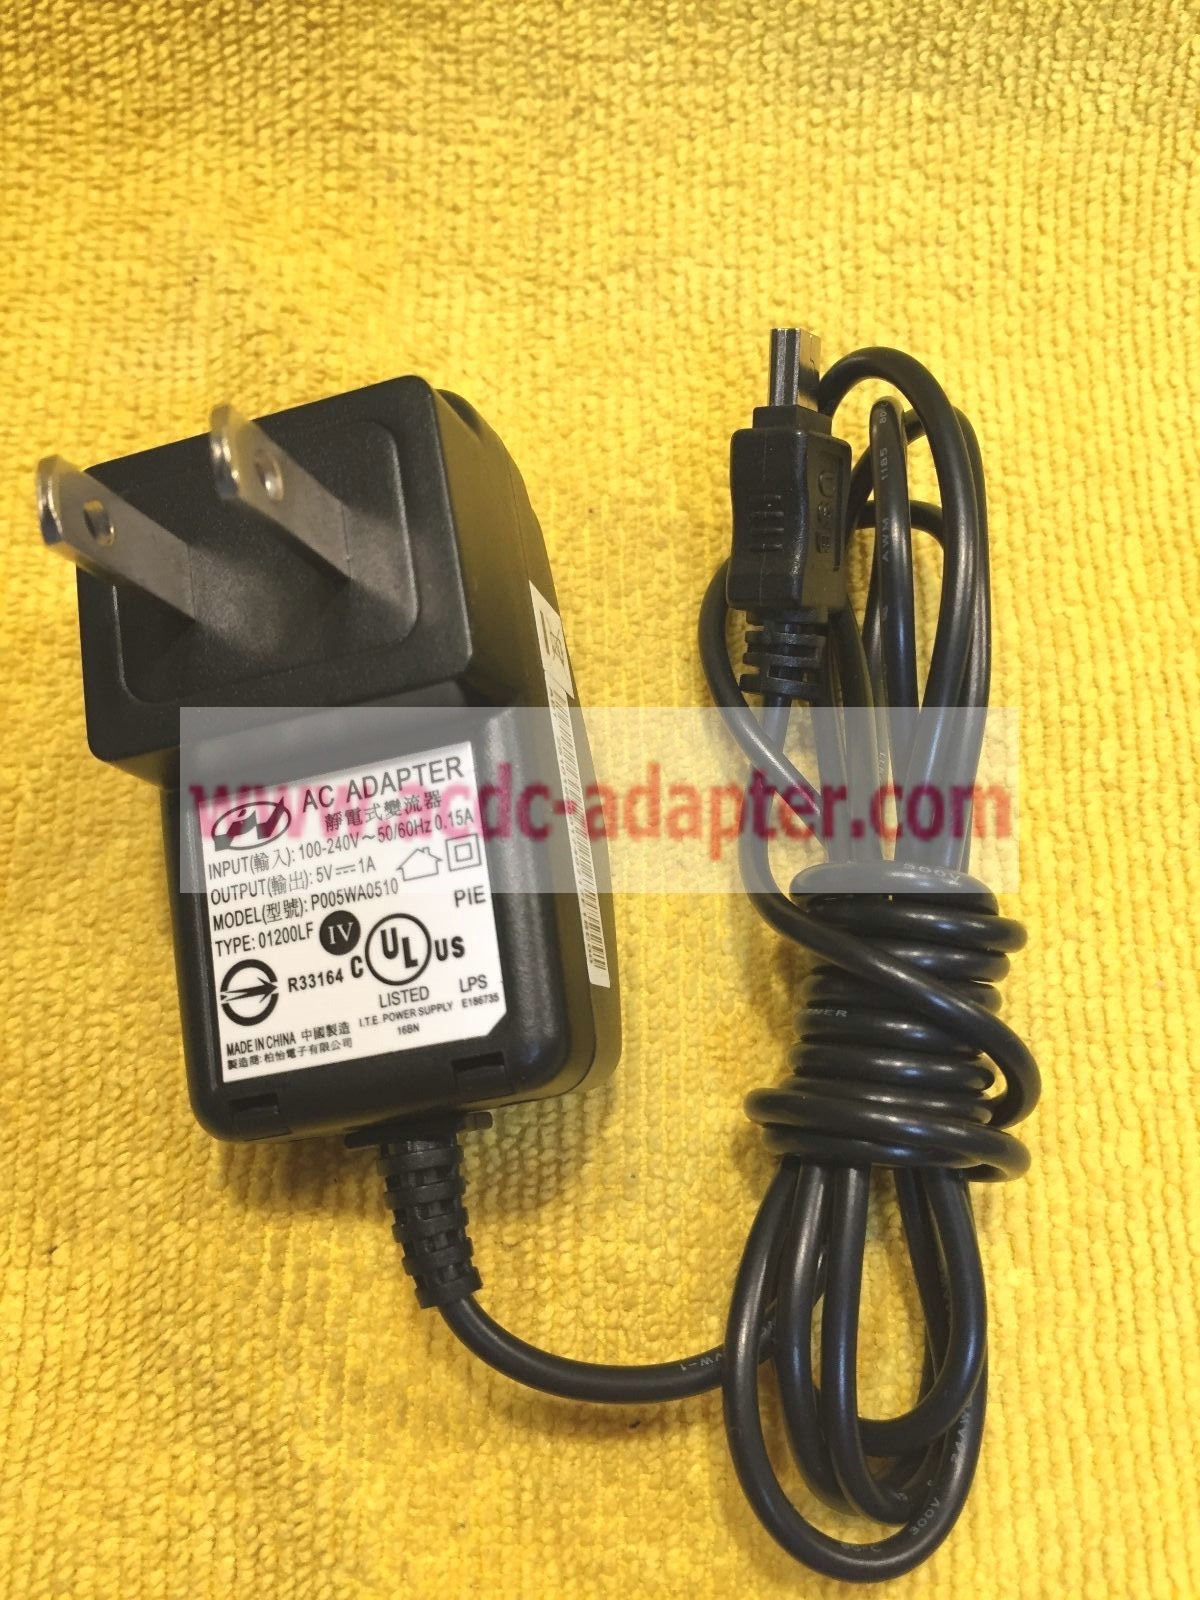 Brand New 5V 1A USB PV P005WA0510 TYPE 01200LF CLASS 2 AC AC-DC Power Adapter - Click Image to Close